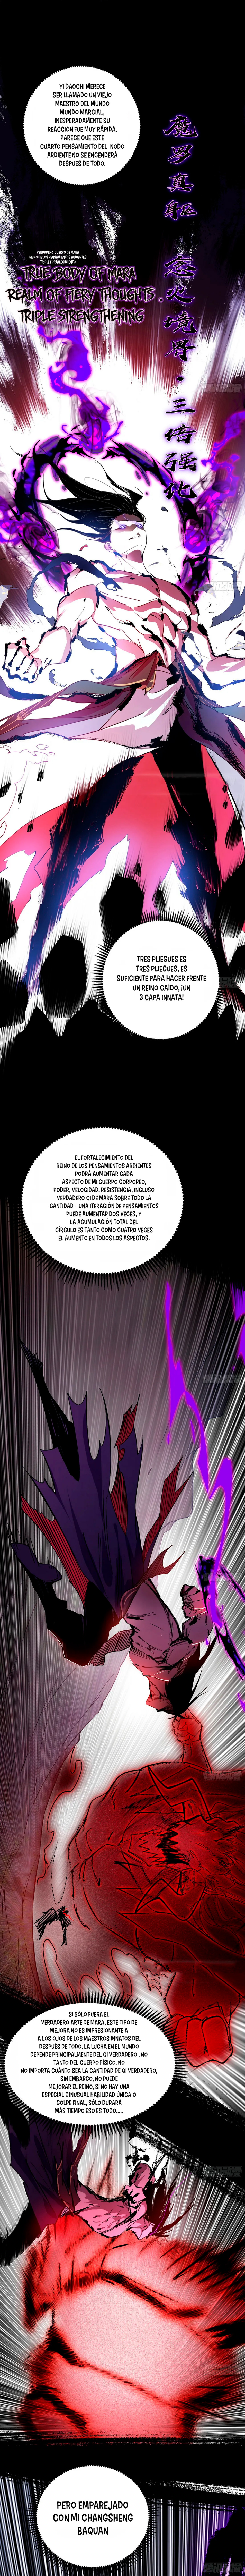 Manga Soy un dios maligno Chapter 309 image number 13